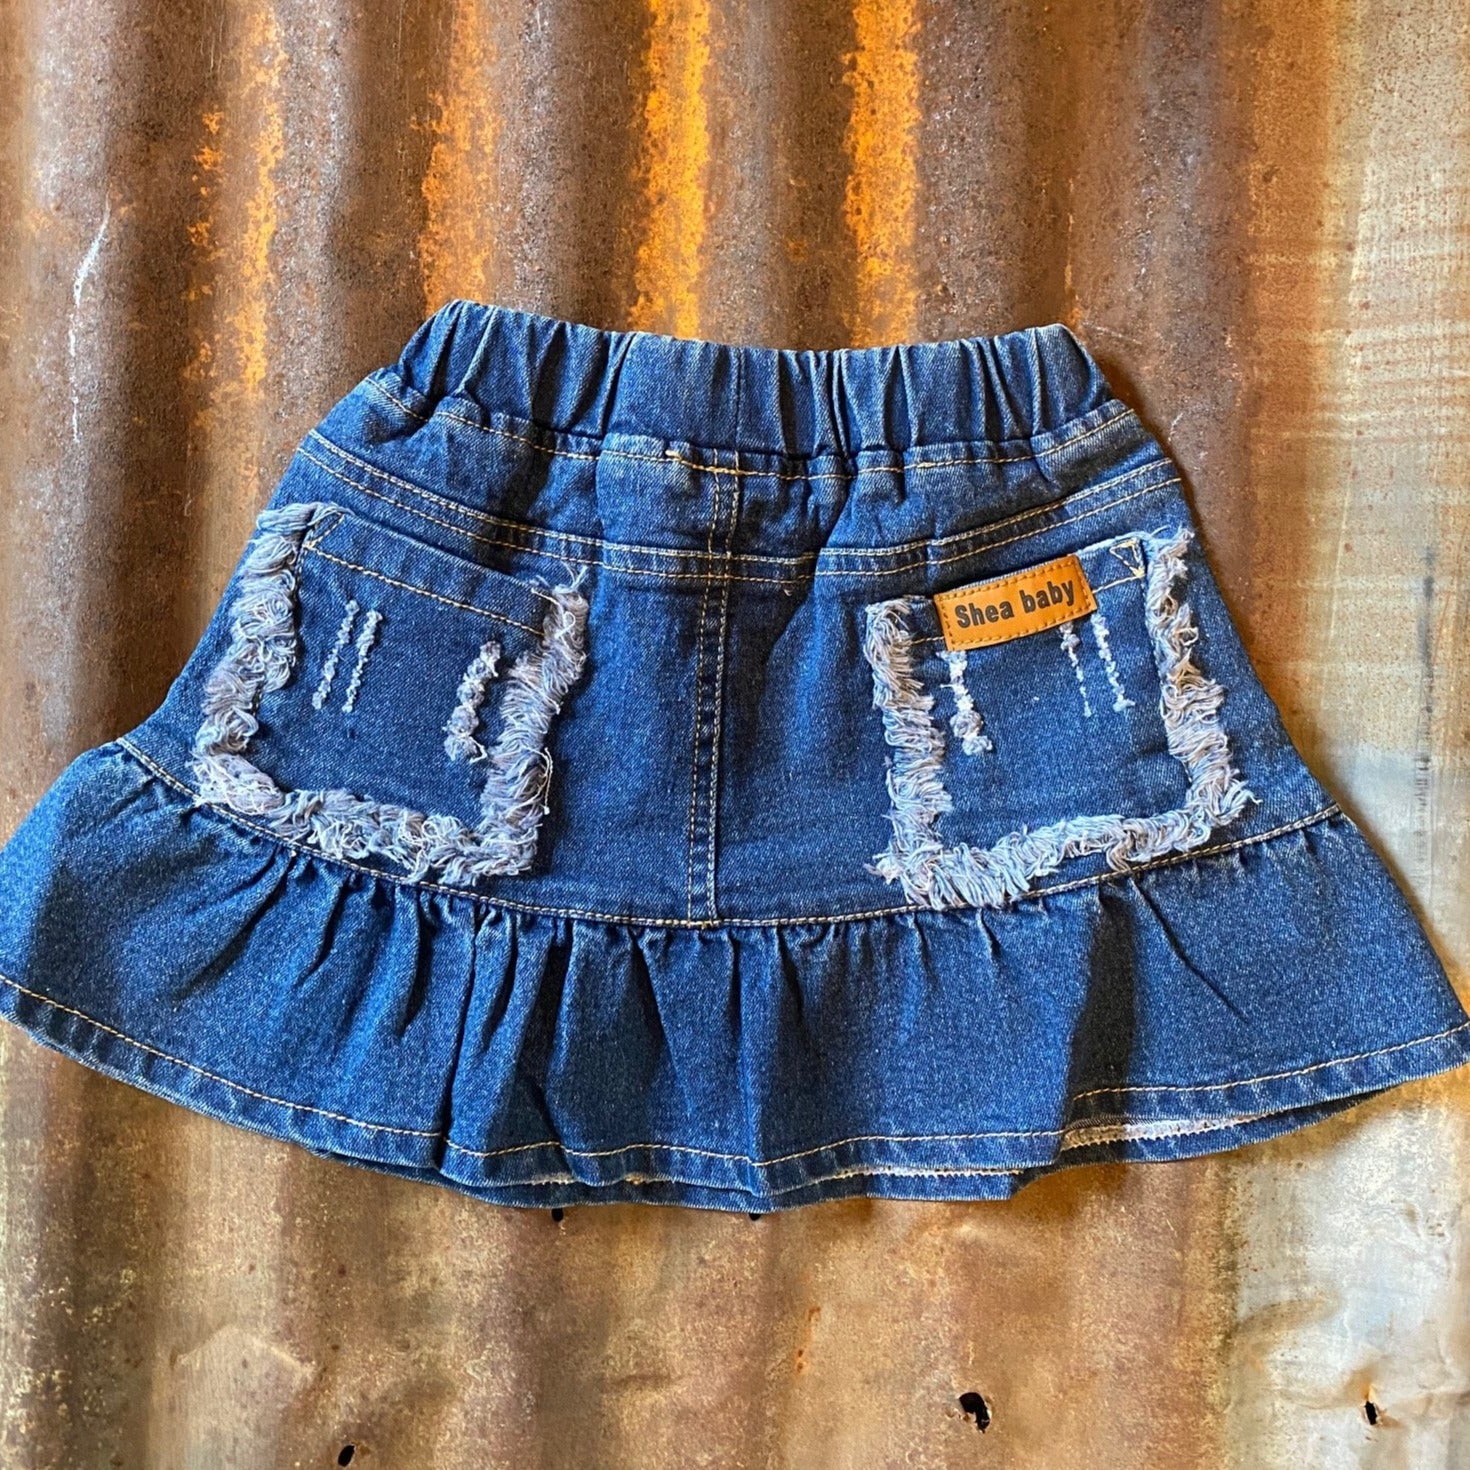 Buy FEM FASHION 100% Organic Cotton Baby Girl's Frill Solid Denim Skirt  with Belt Blue at Amazon.in